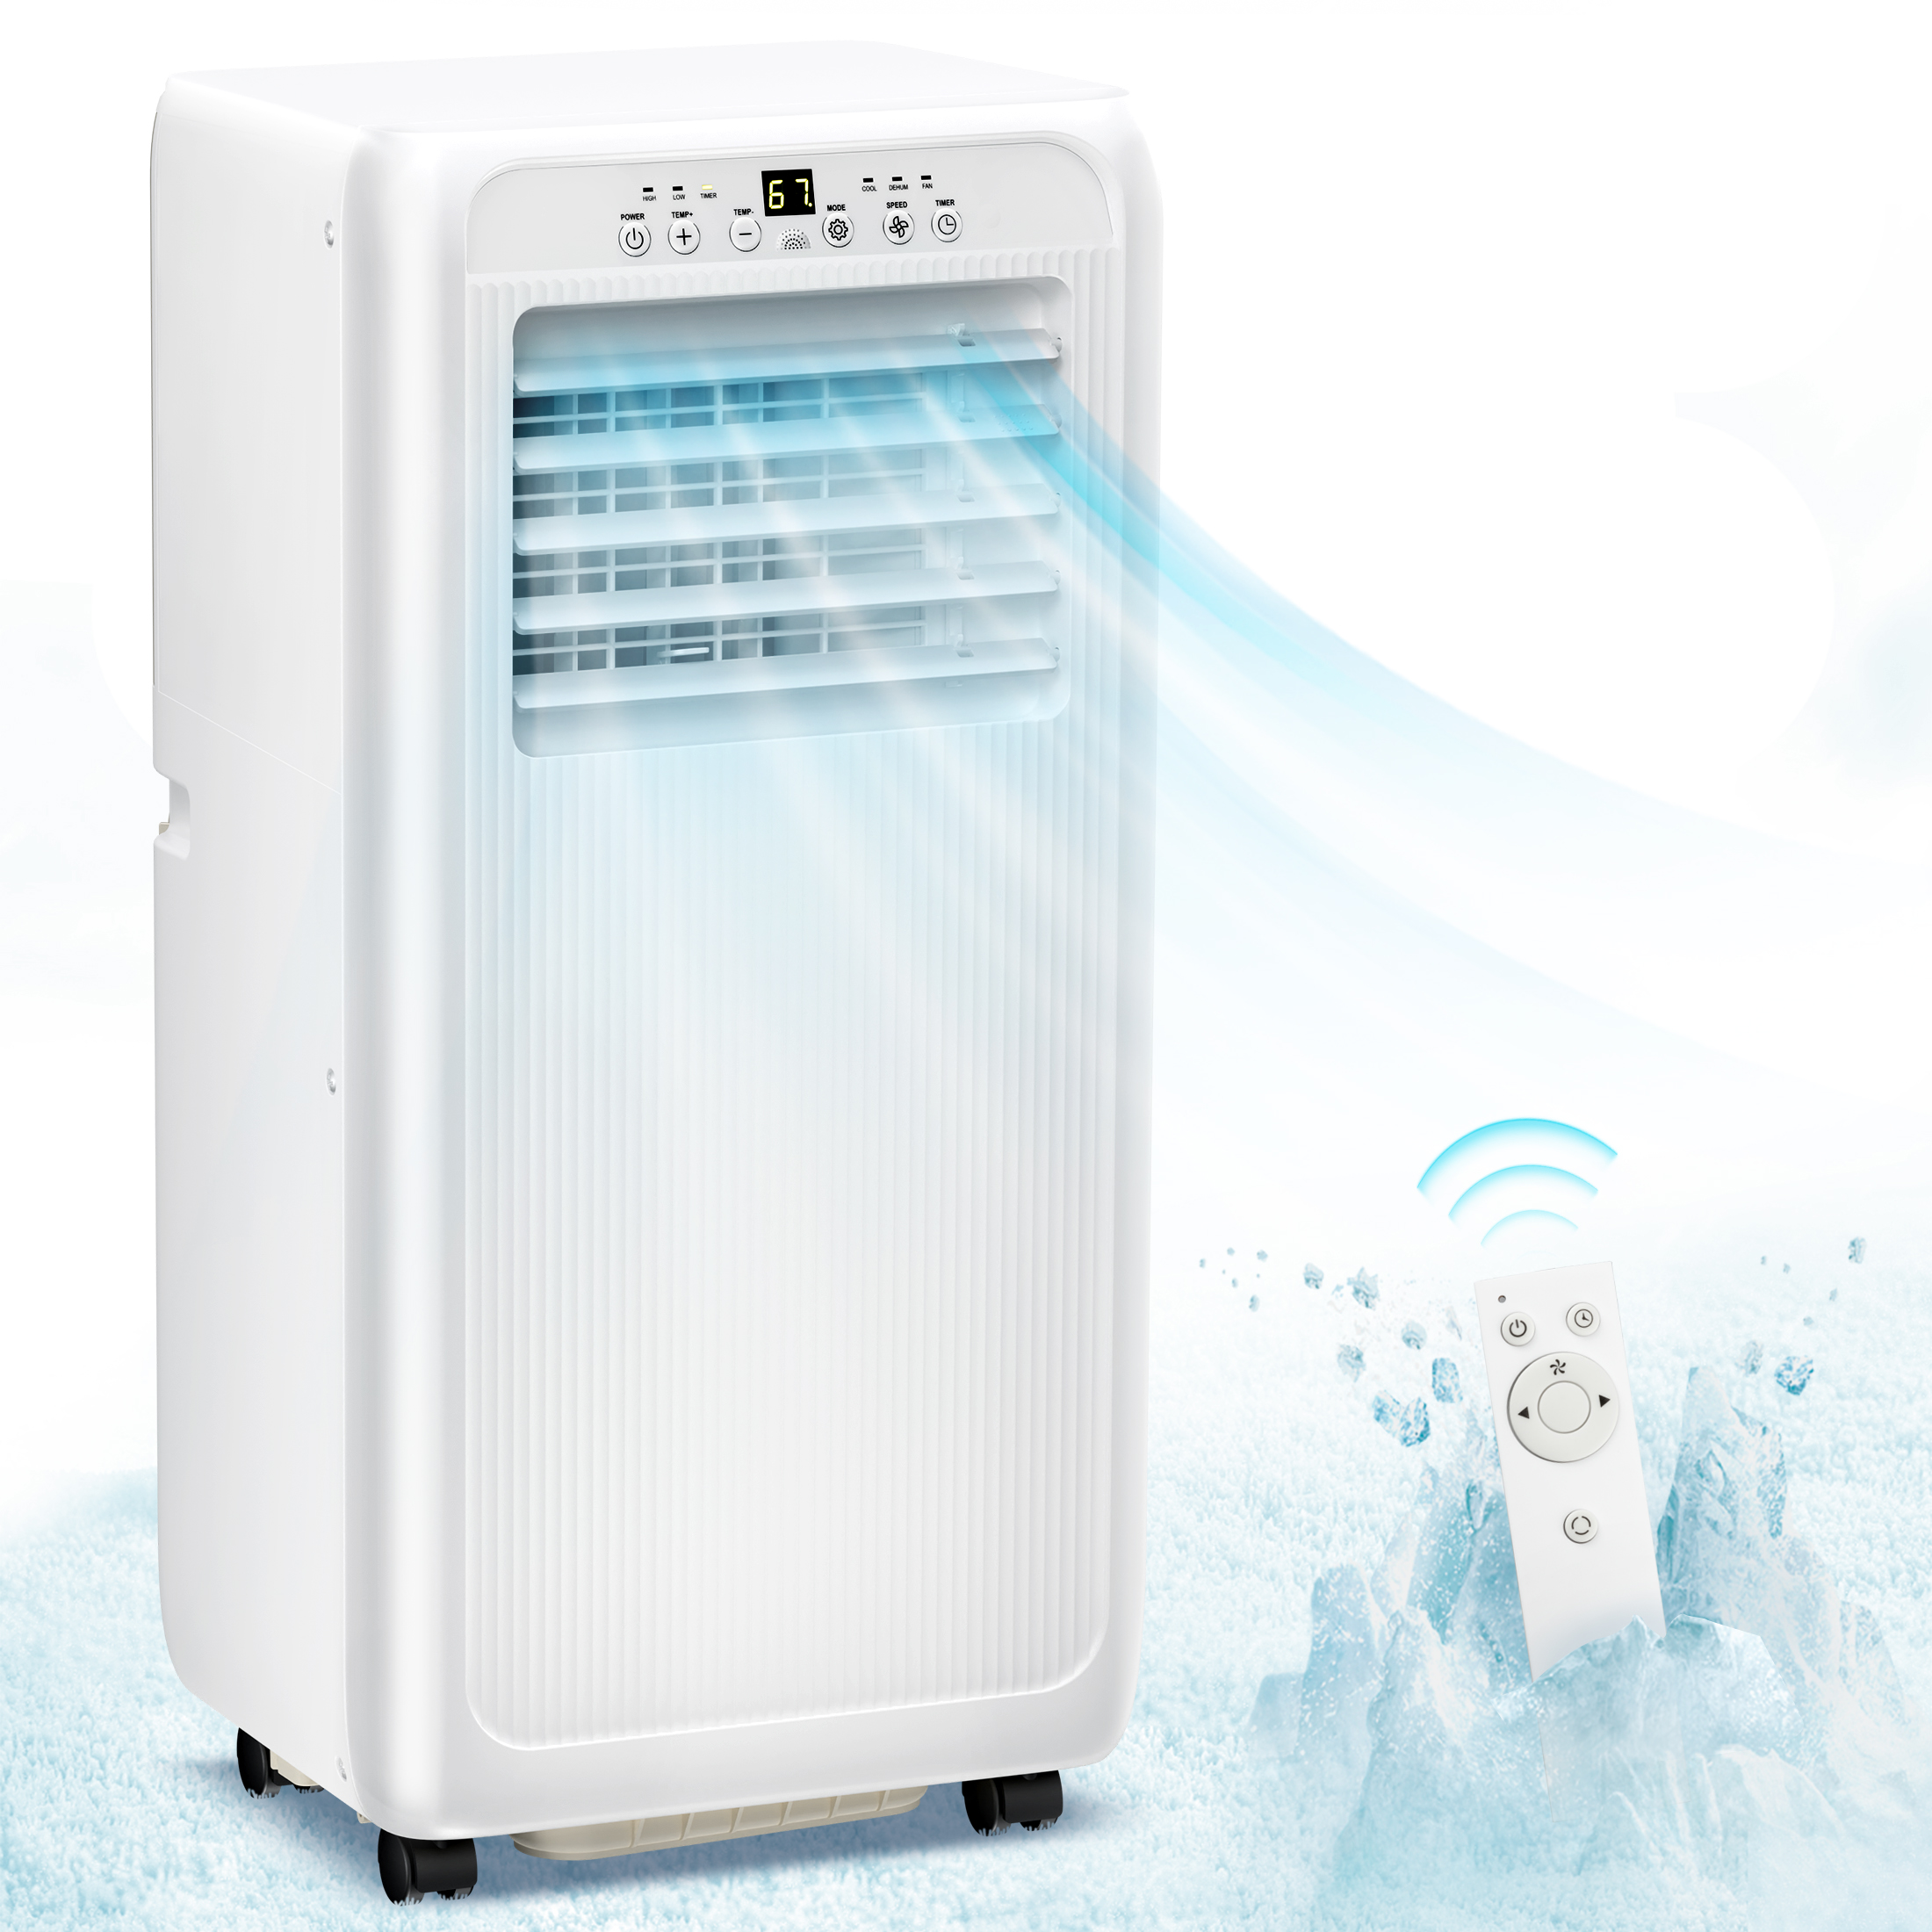 Auseo 6000BTU (10000 BTU ASHARE) Portable Air Conditioner, Dehumidifier, Fan, 3 in 1 AC with 24-Hour Timer - image 1 of 7